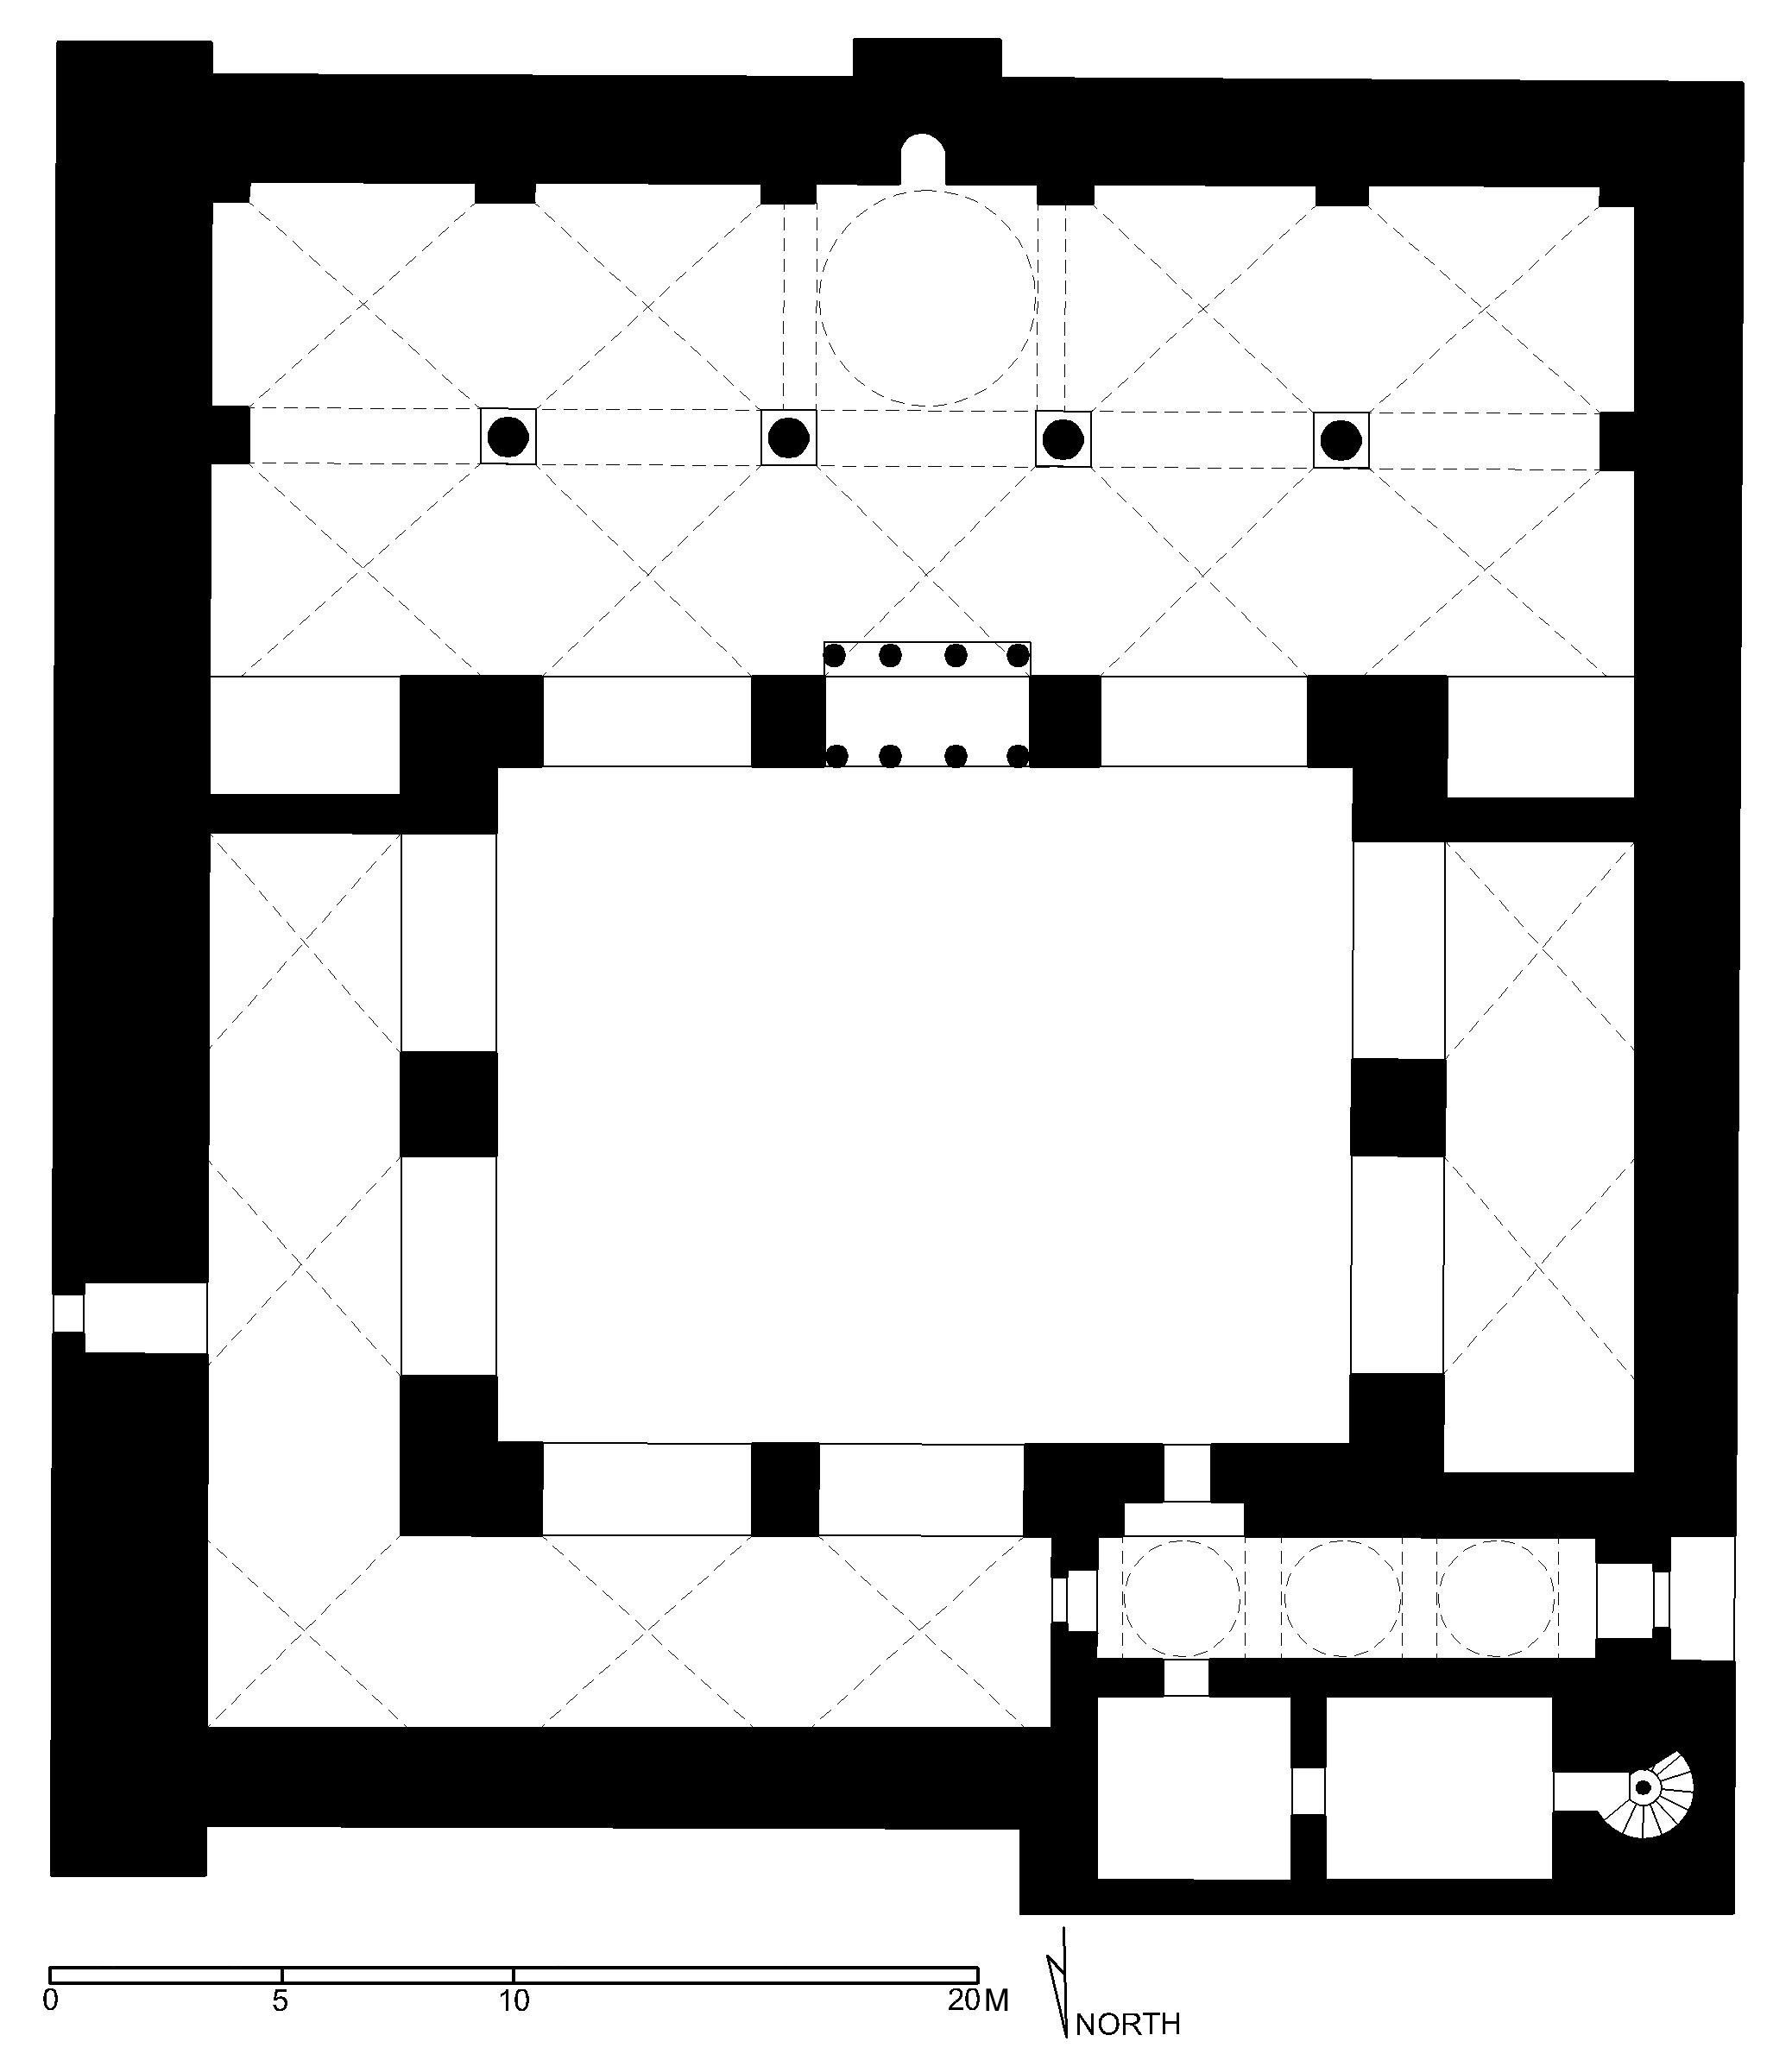 Jami' Altinbugha - Floor plan of mosque (after Meinecke) in AutoCAD 2000 format. Click the download button to download a zipped file containing the .dwg file. 